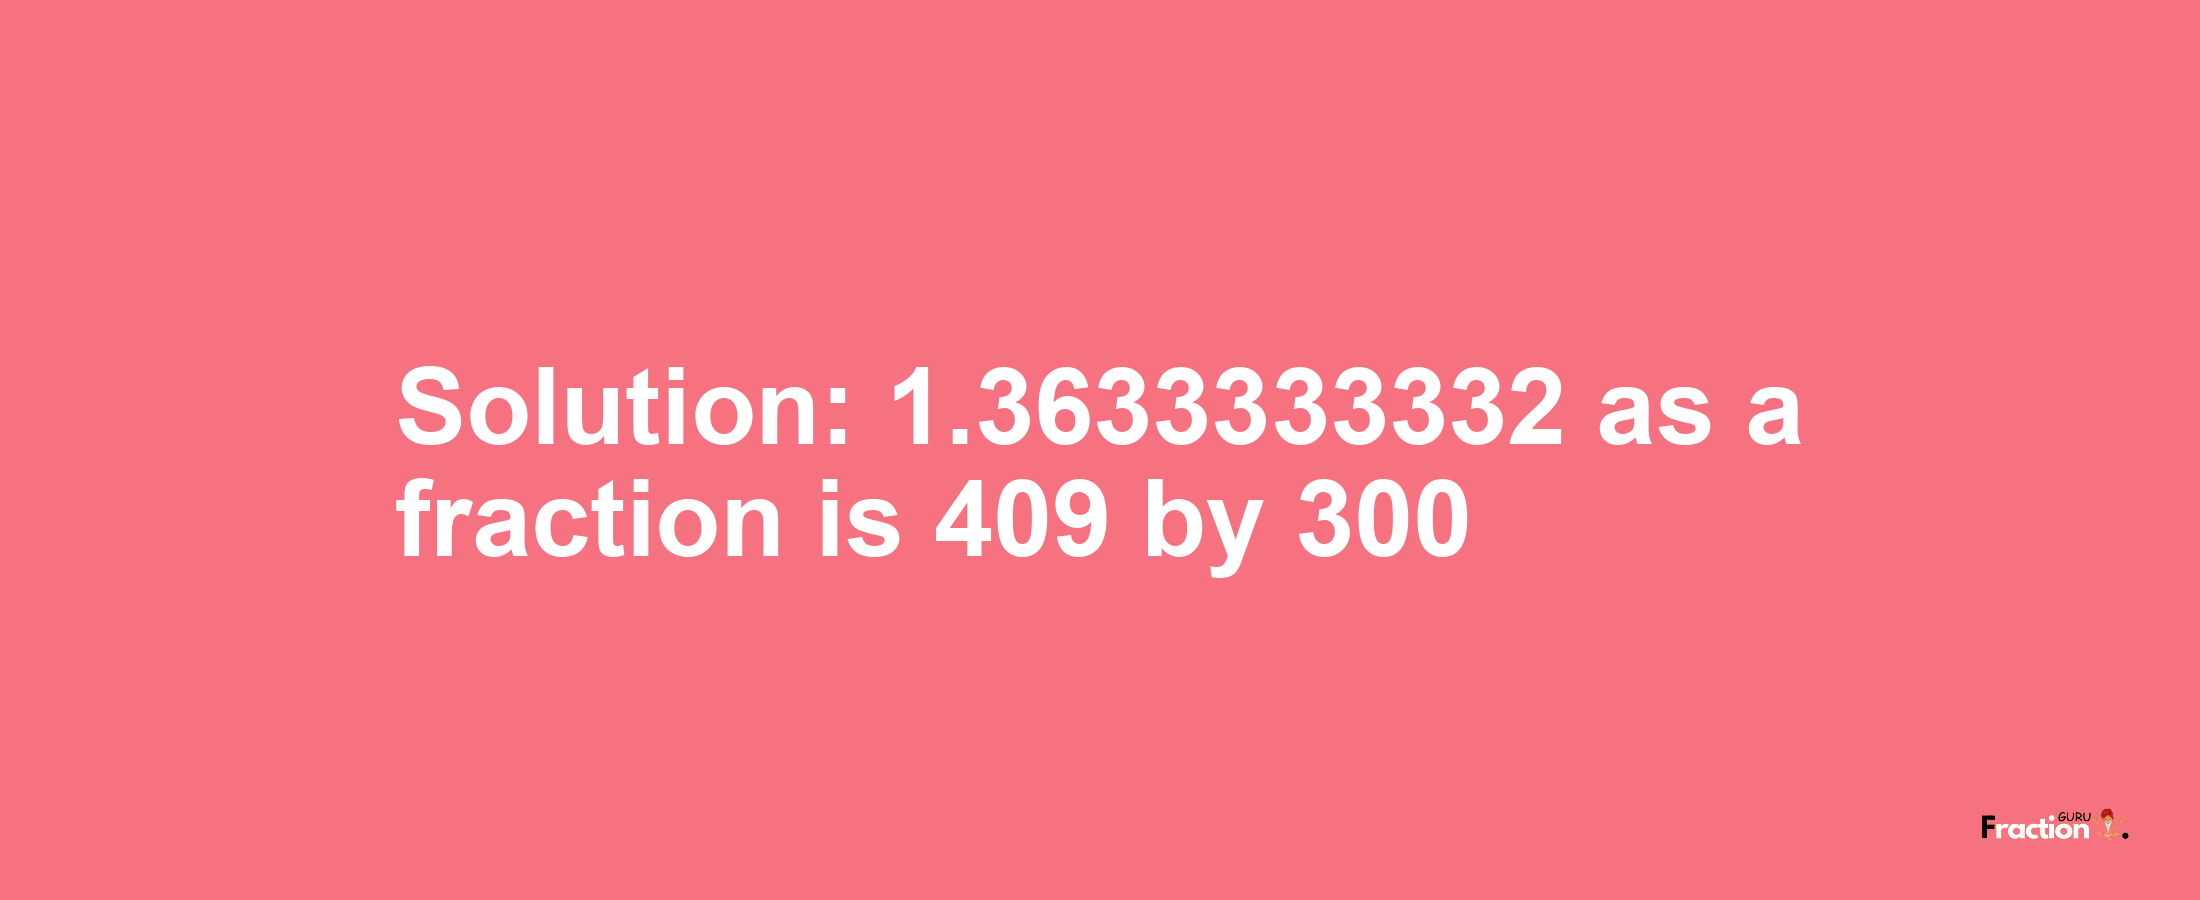 Solution:1.3633333332 as a fraction is 409/300